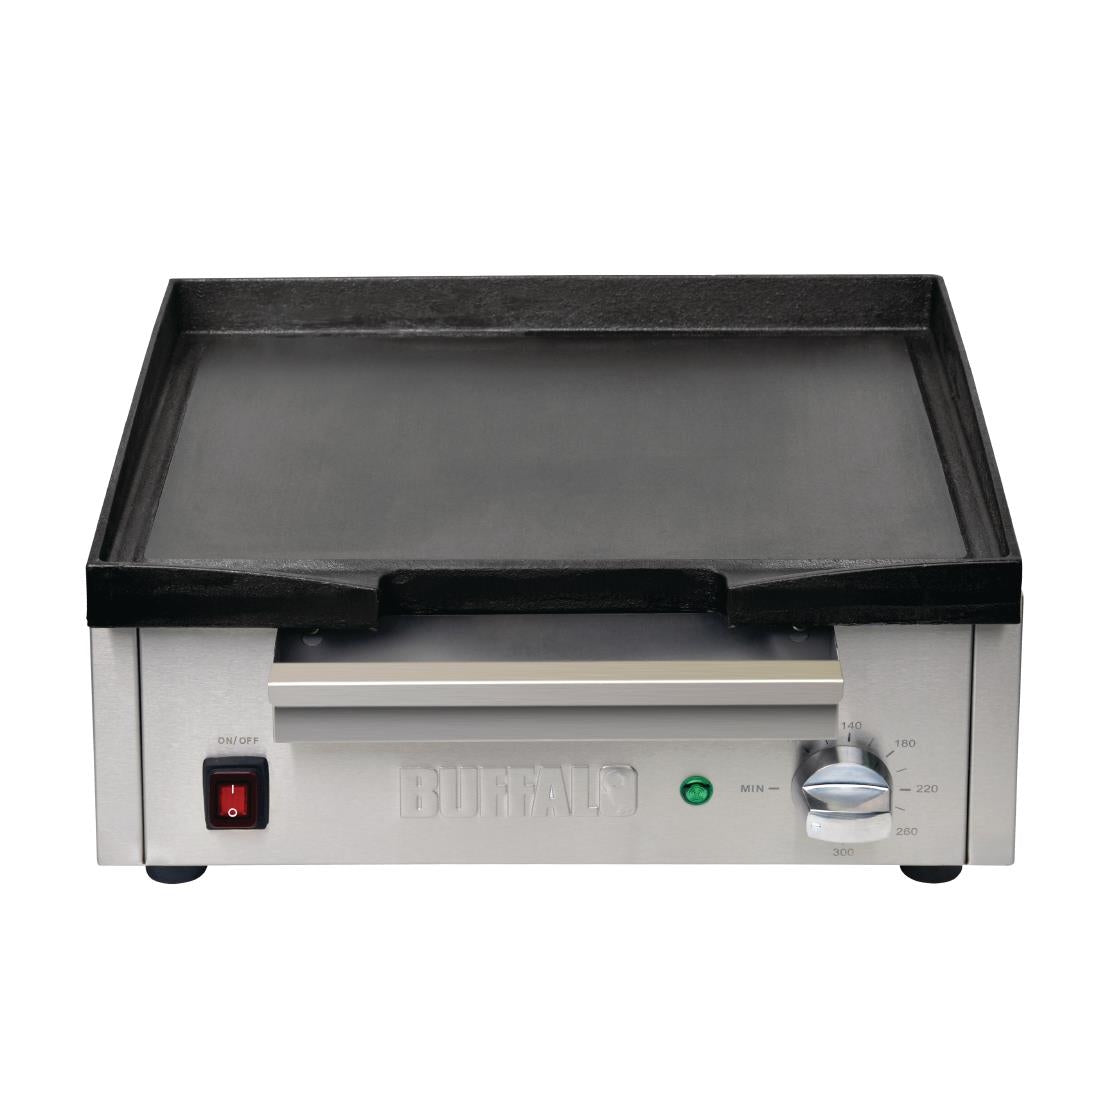 DC900 Buffalo Cast Iron Countertop Griddle JD Catering Equipment Solutions Ltd